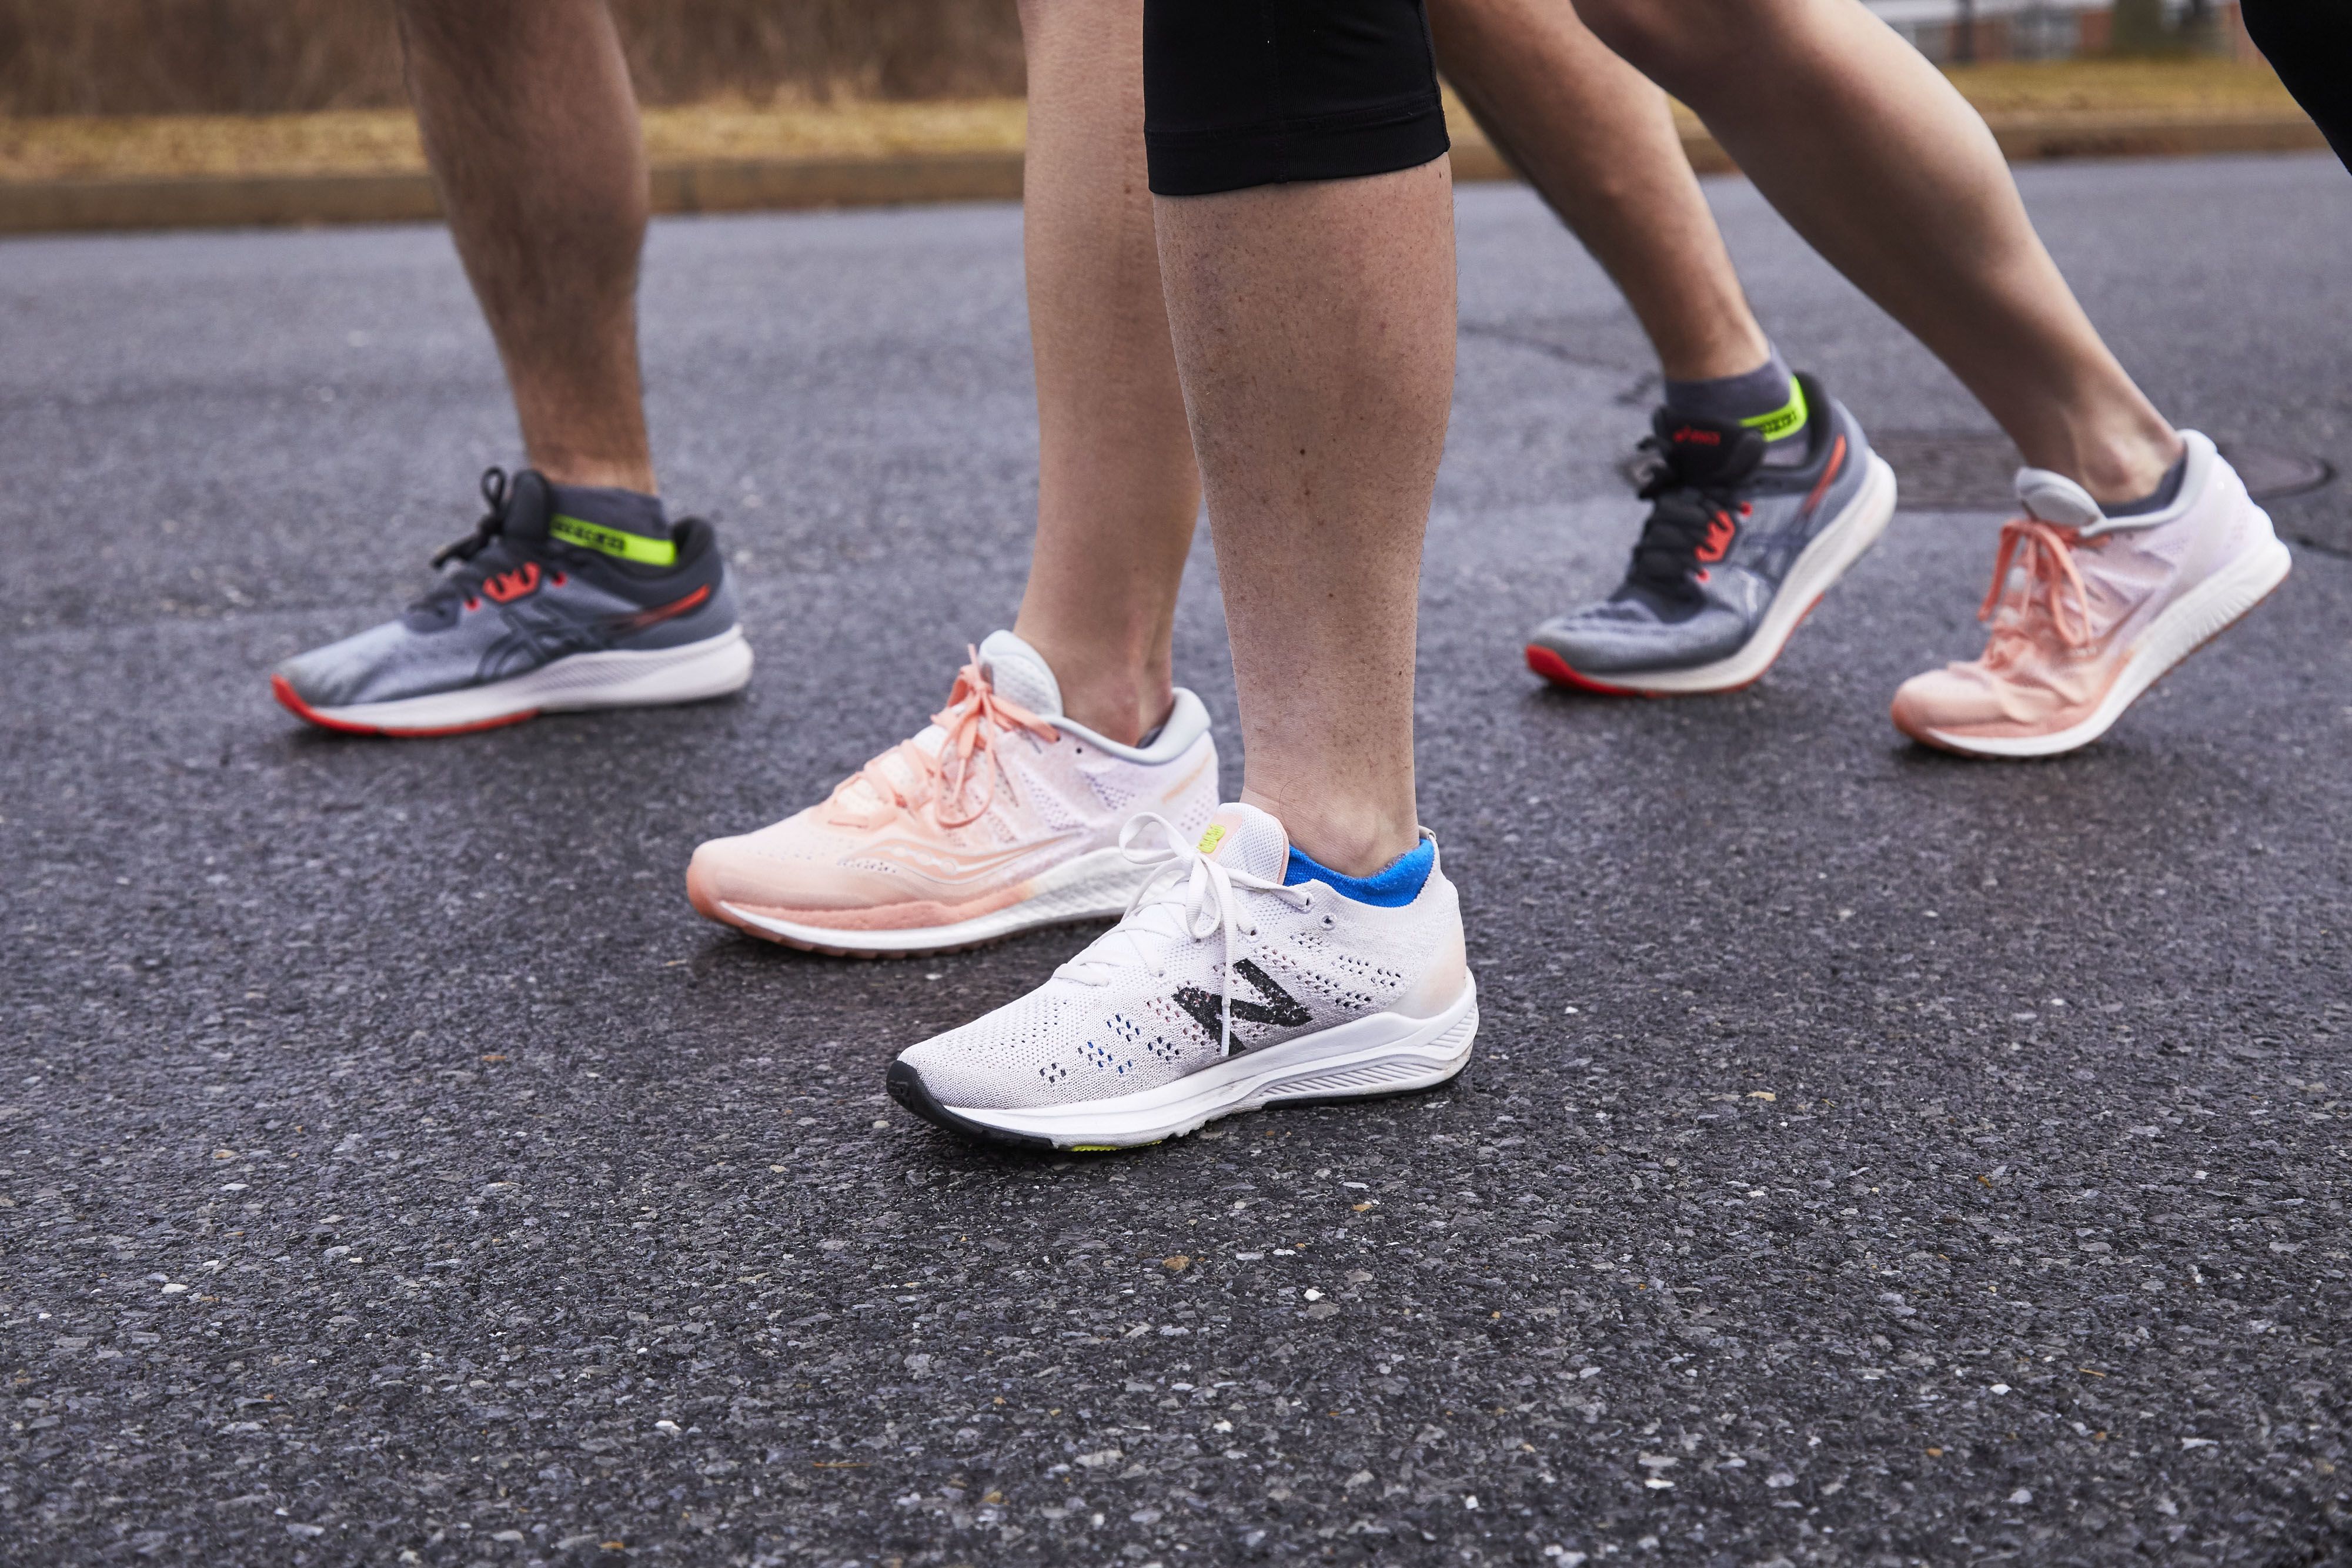 which brand has the best running shoes